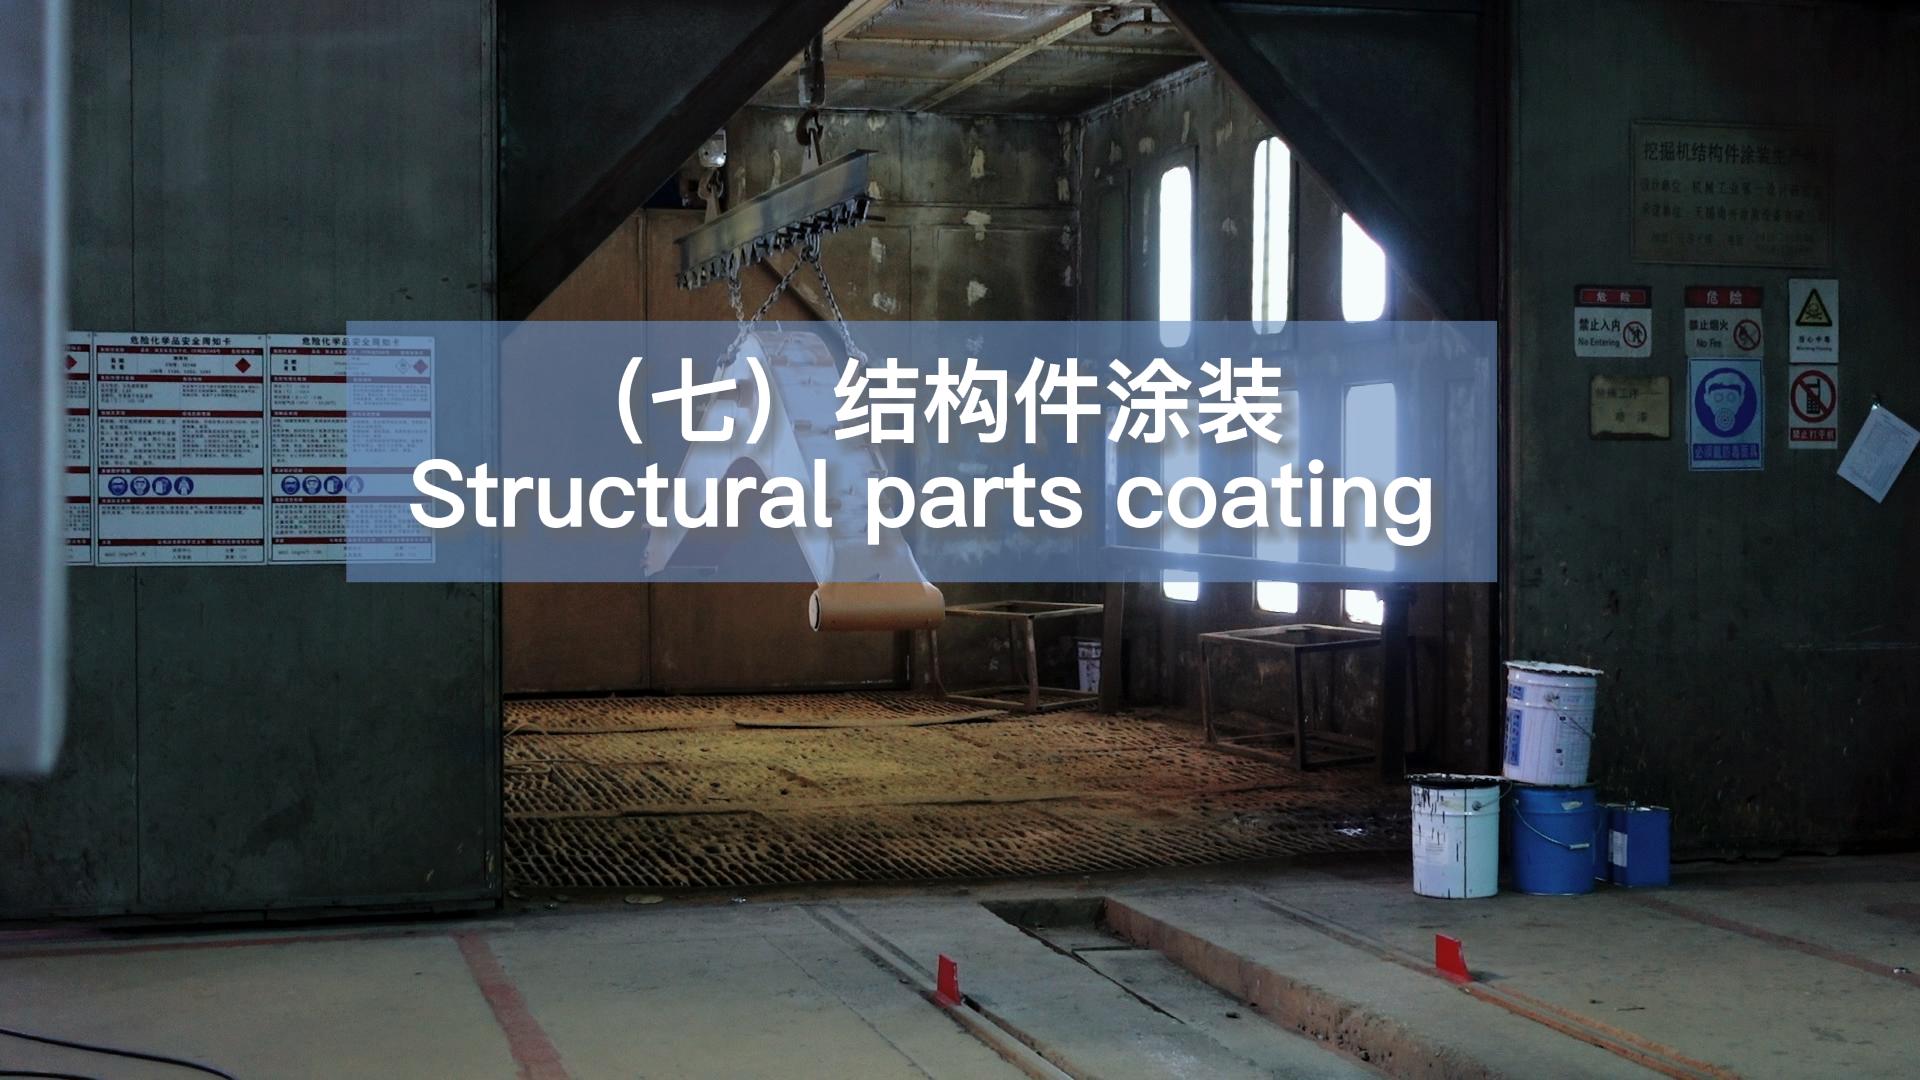 Structural parts coating